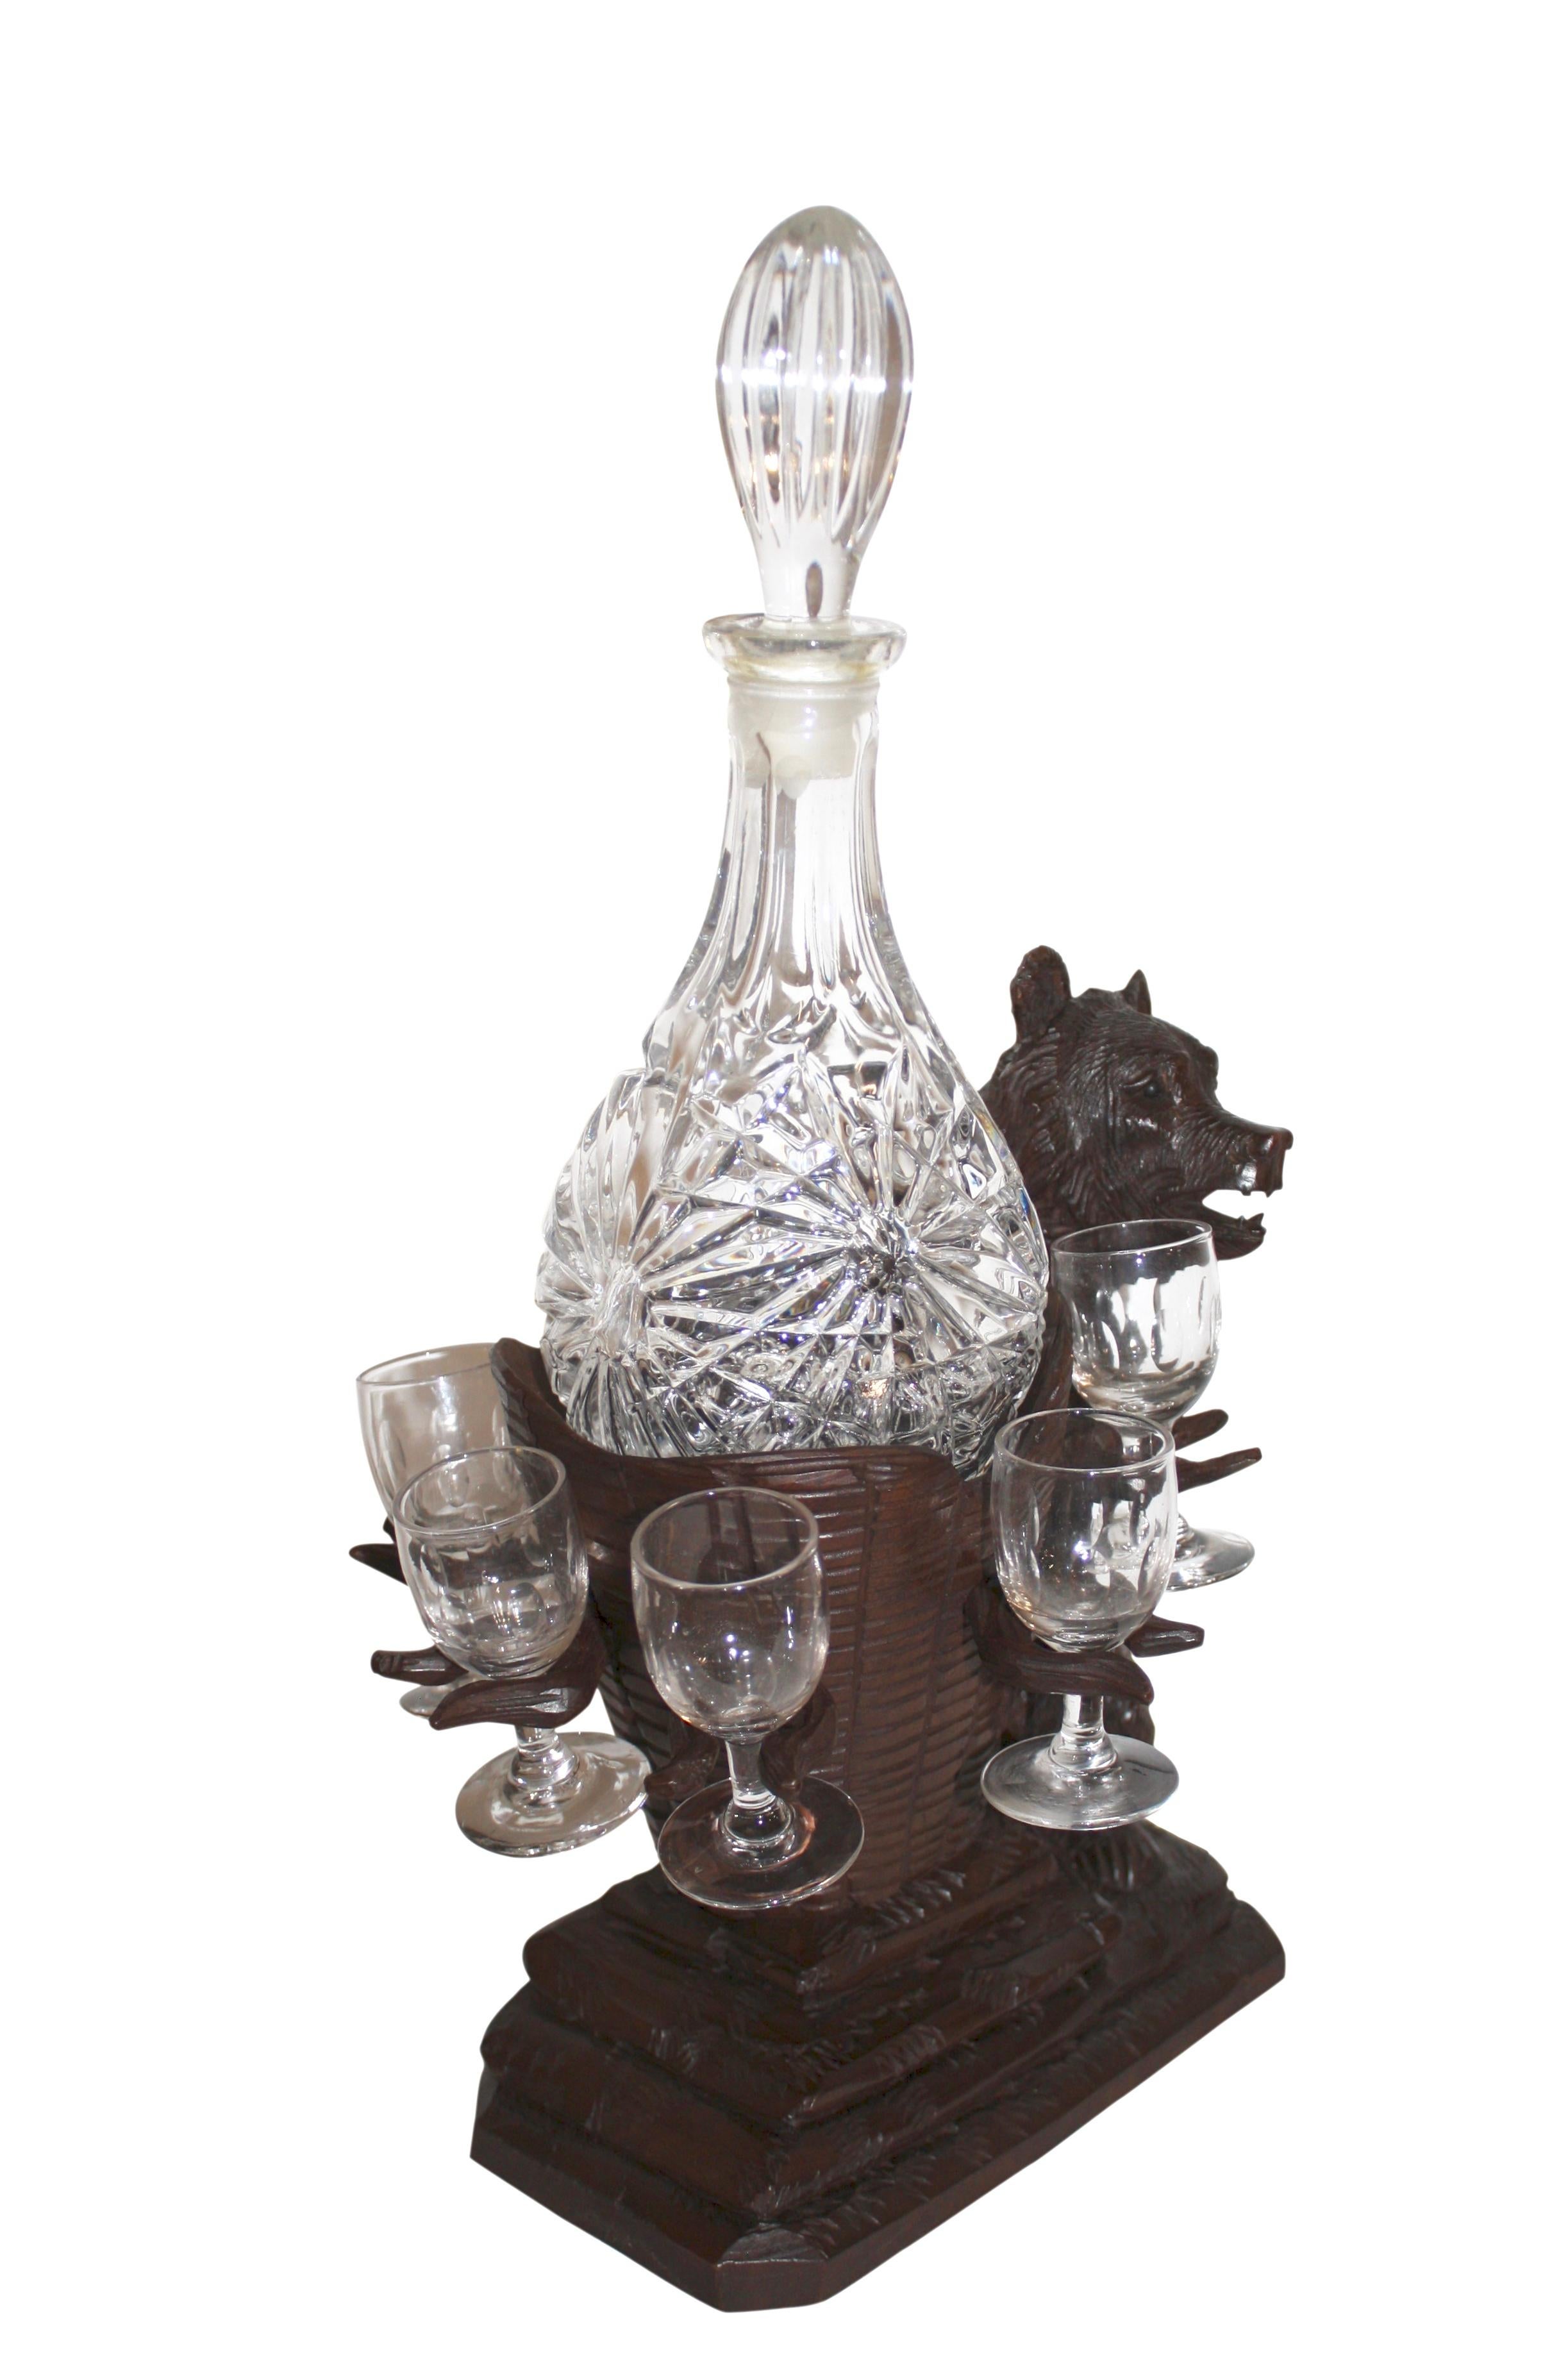 Looking very pleased with himself, this whimsical, Black Forest bear carries a wicker basket with a decanter larger than he is. Six stemmed glasses are suspended from the basket.
 